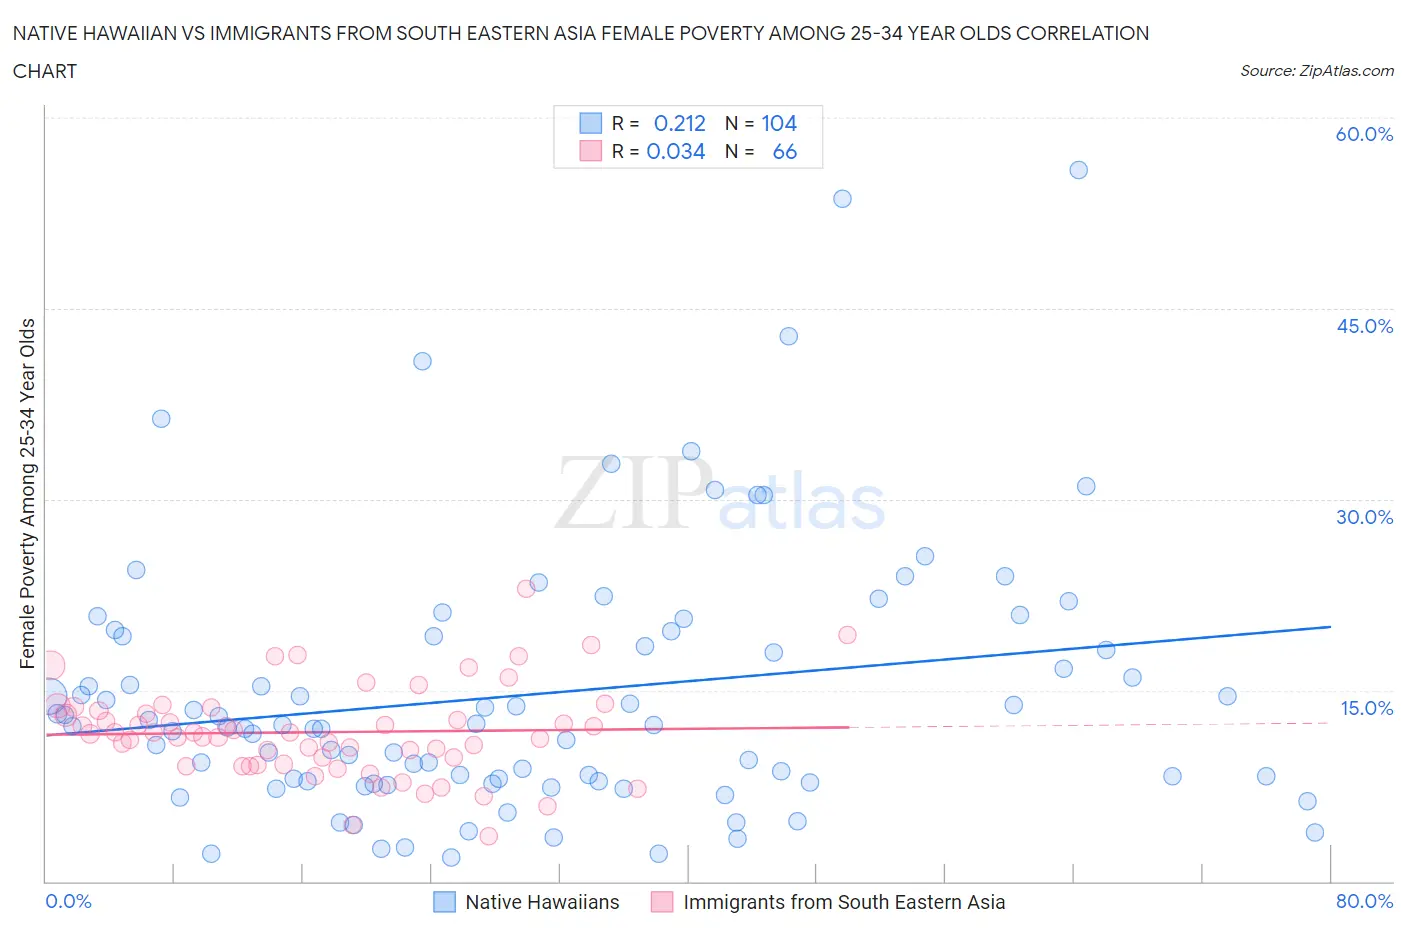 Native Hawaiian vs Immigrants from South Eastern Asia Female Poverty Among 25-34 Year Olds